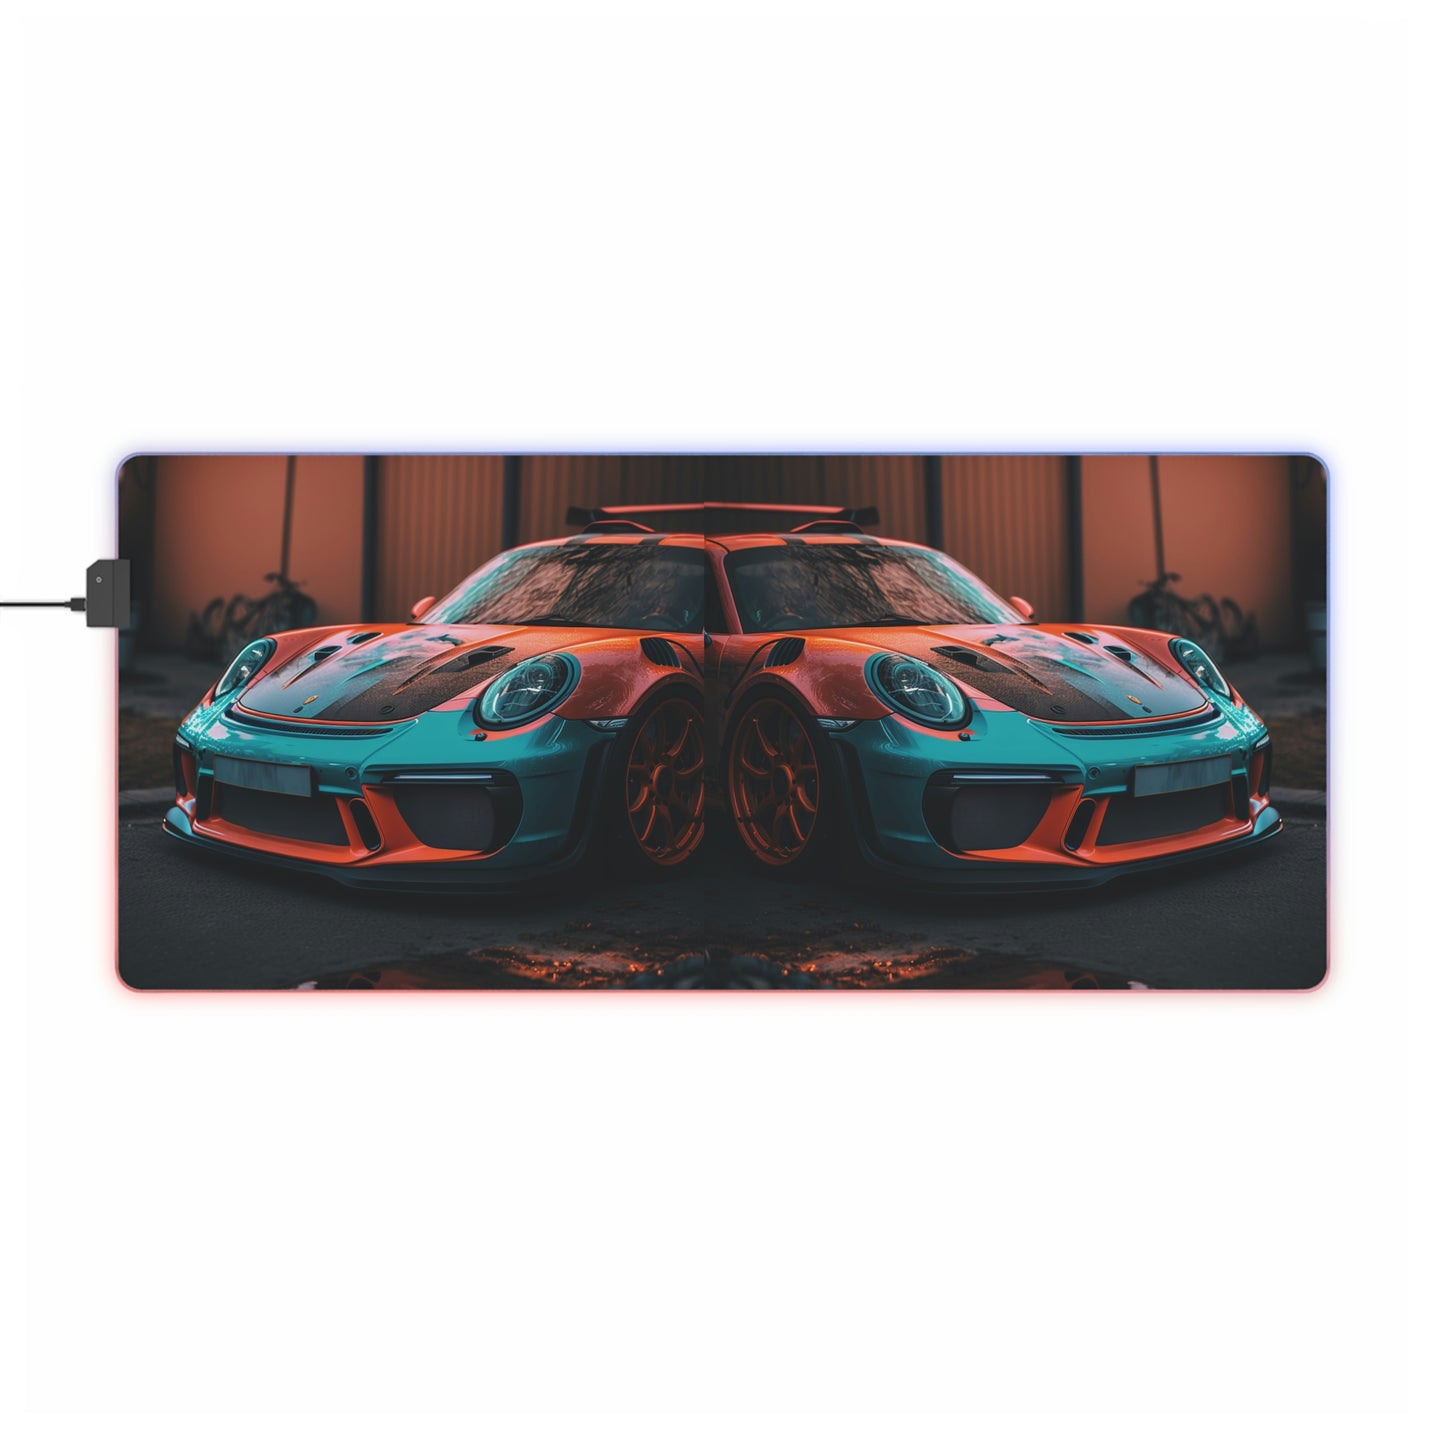 LED Gaming Mouse Pad Porsche 911 GT3 3